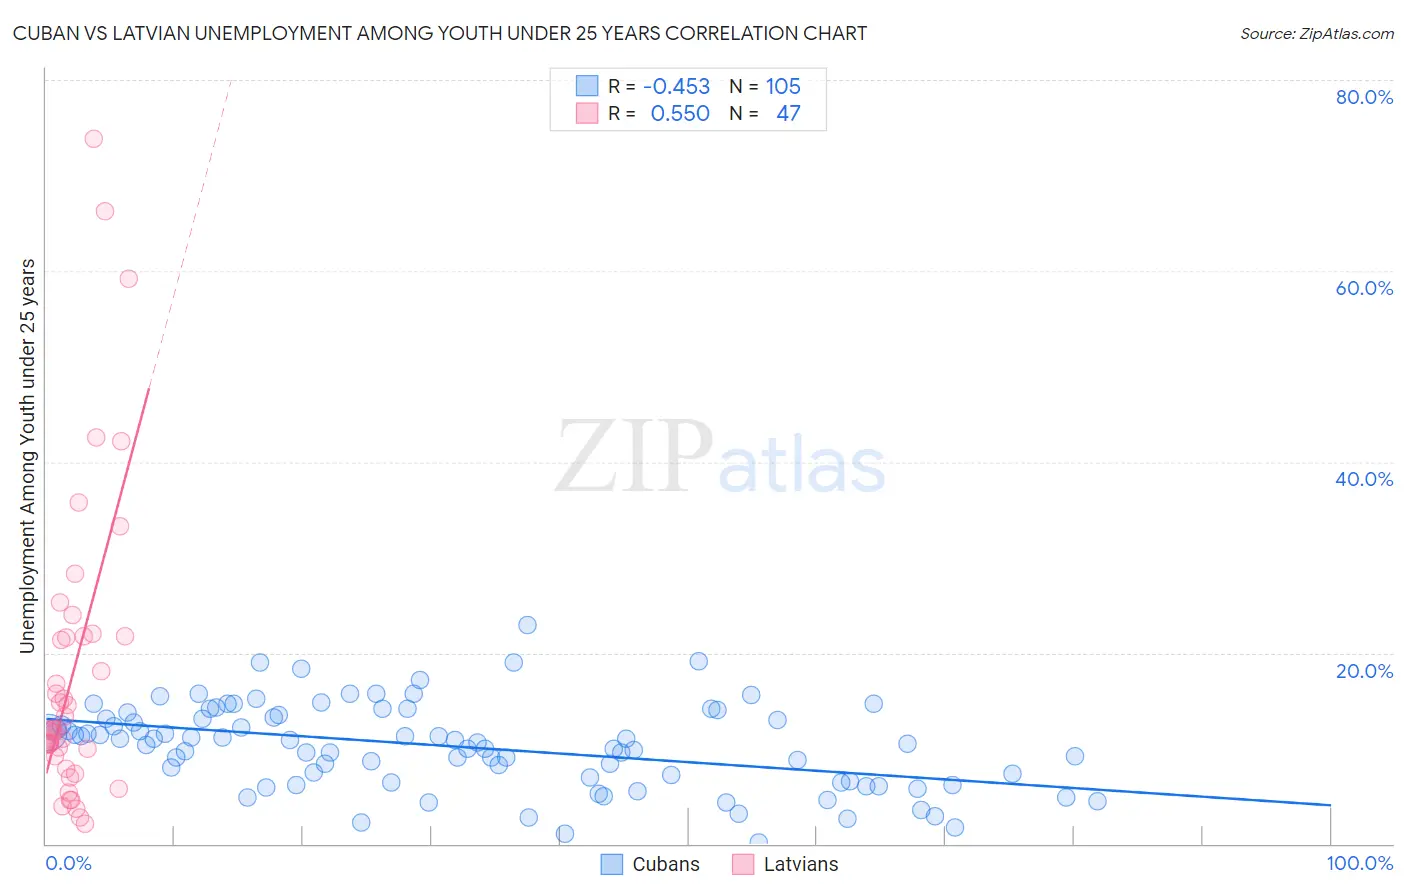 Cuban vs Latvian Unemployment Among Youth under 25 years